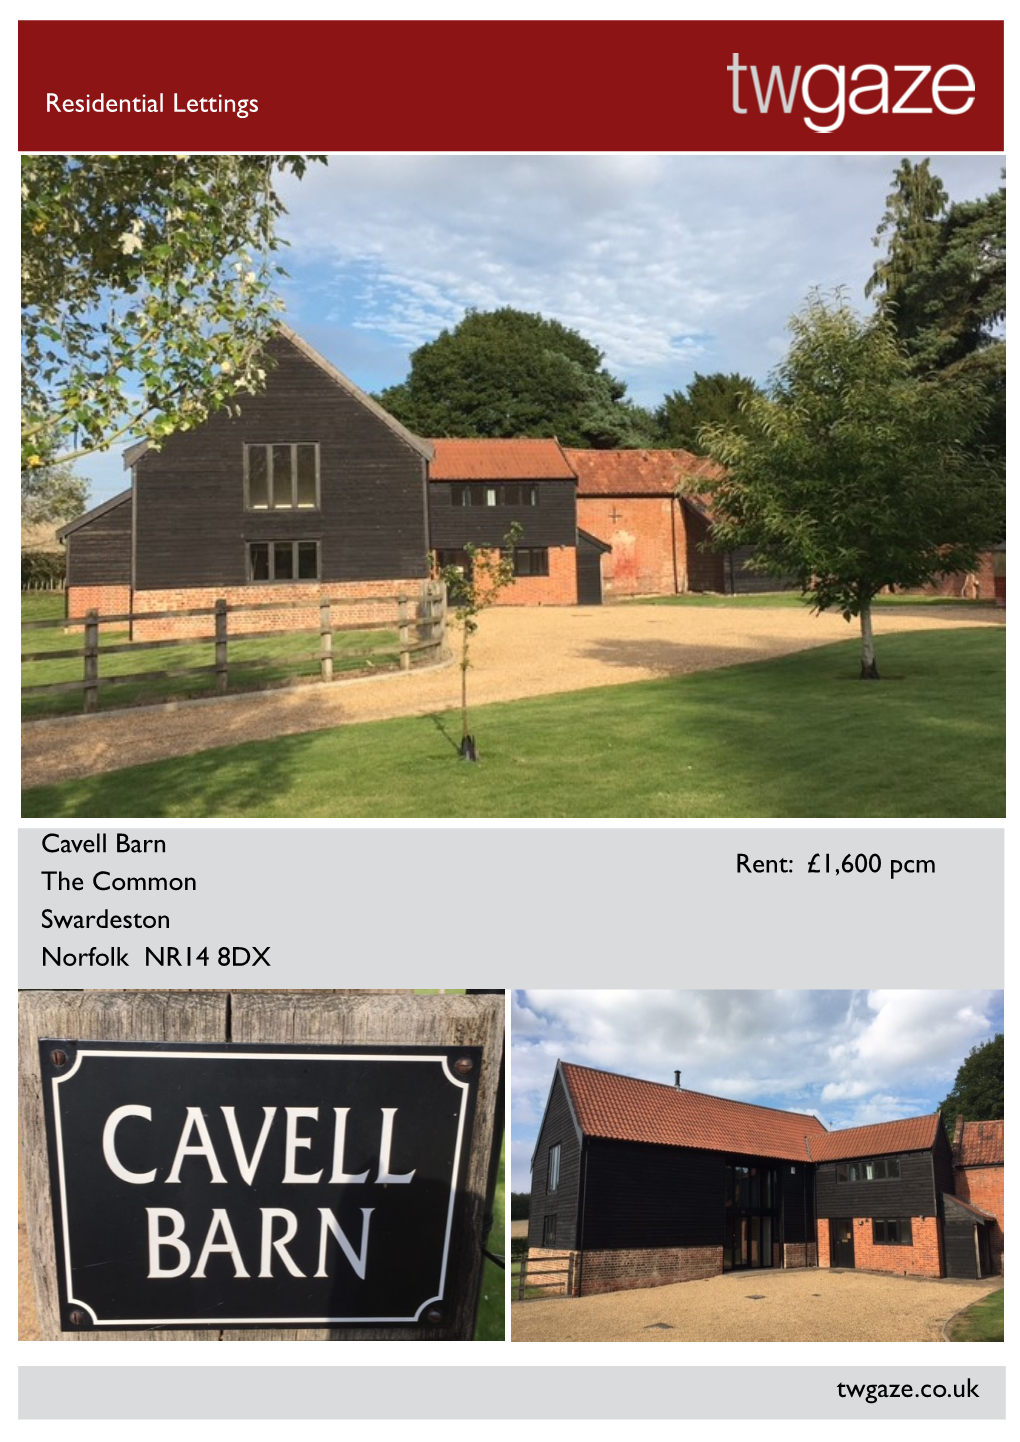 Residential Lettings Cavell Barn the Common Swardeston